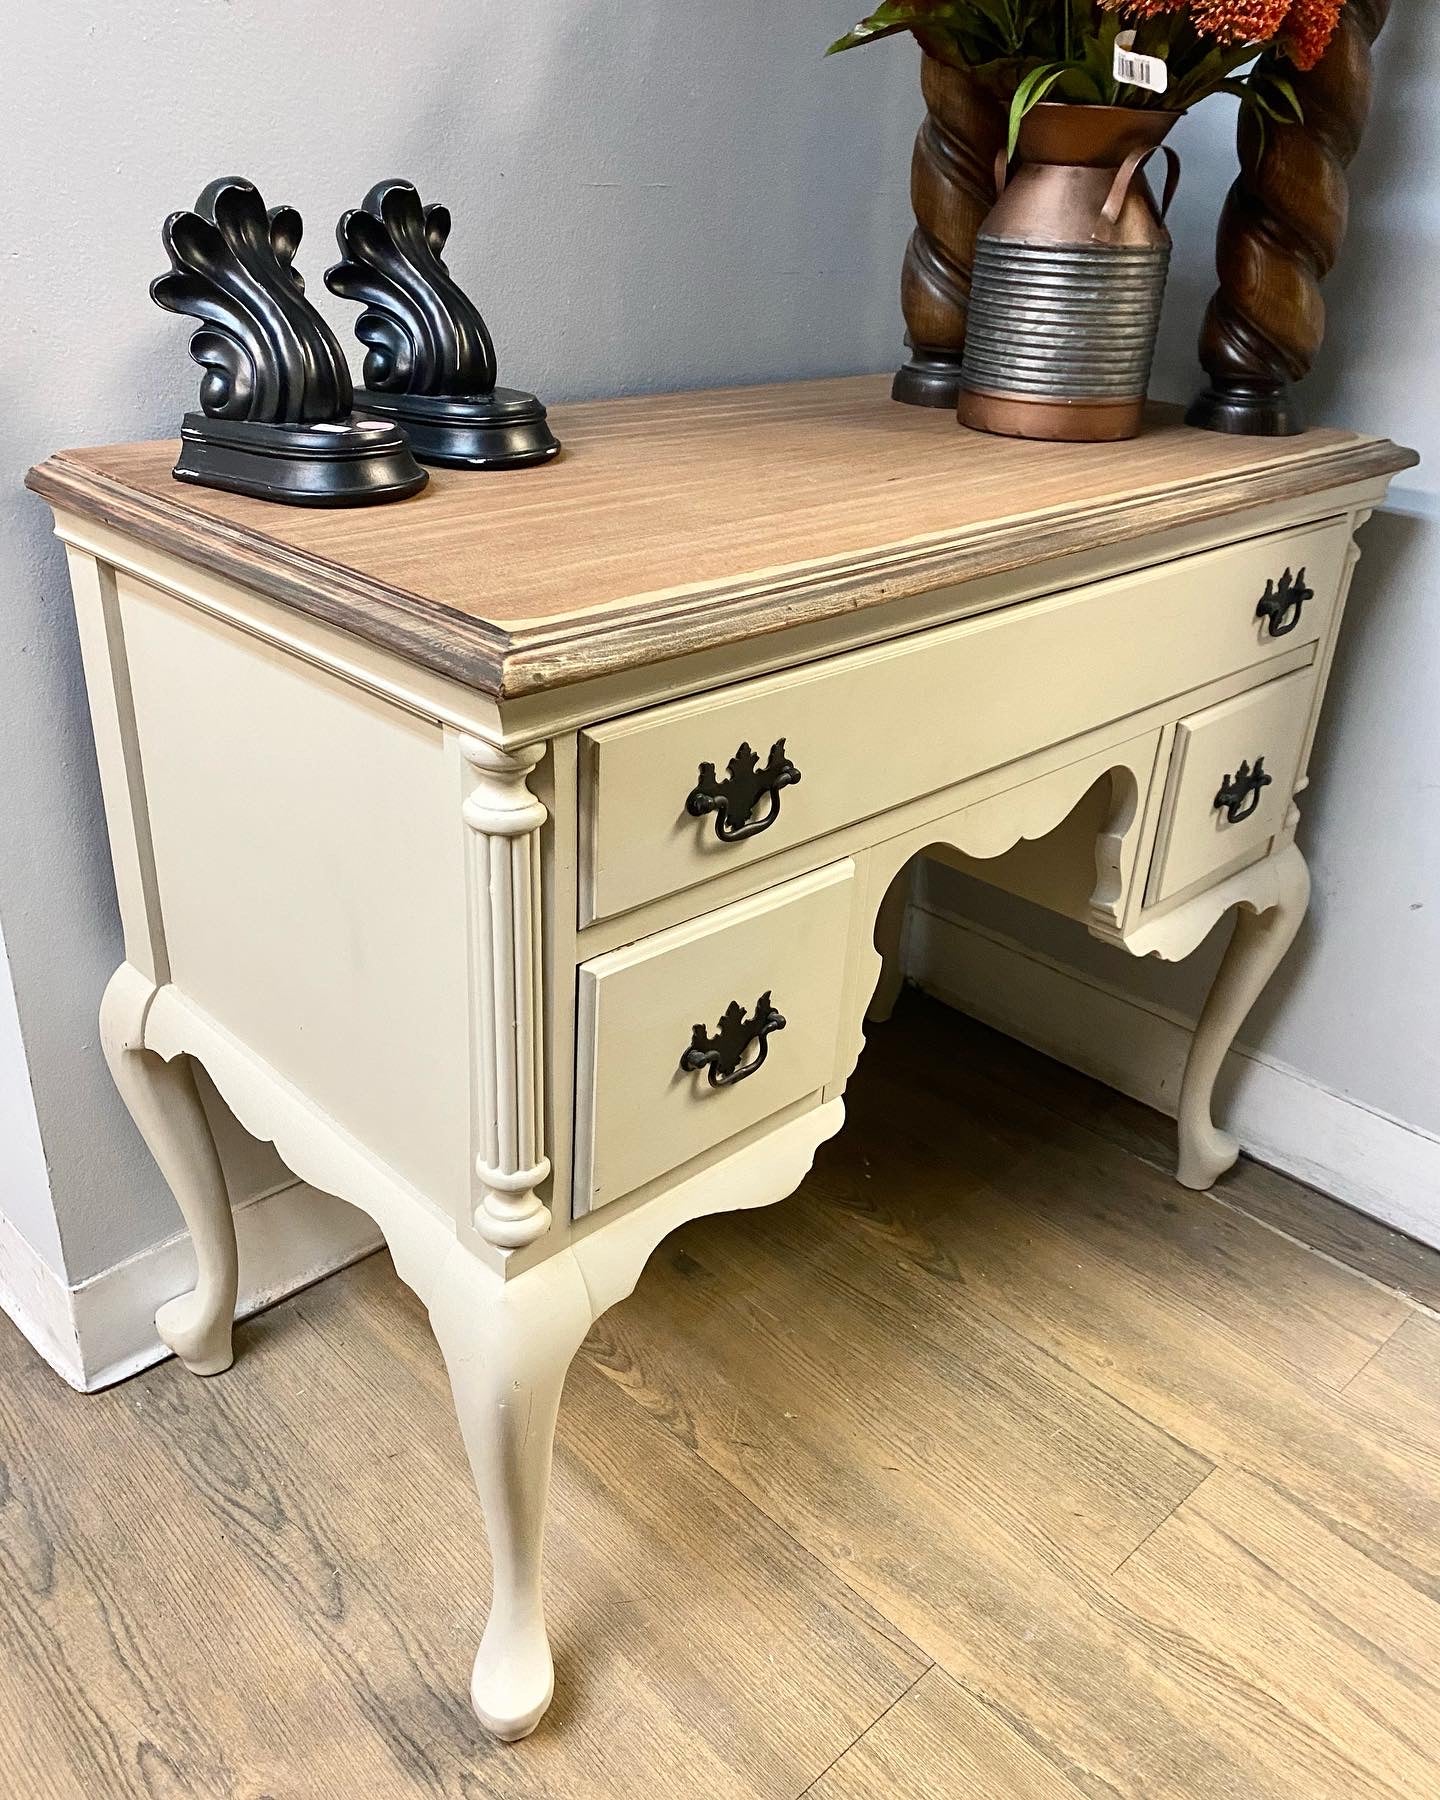 Neutral hand-painted distressed wood top desk